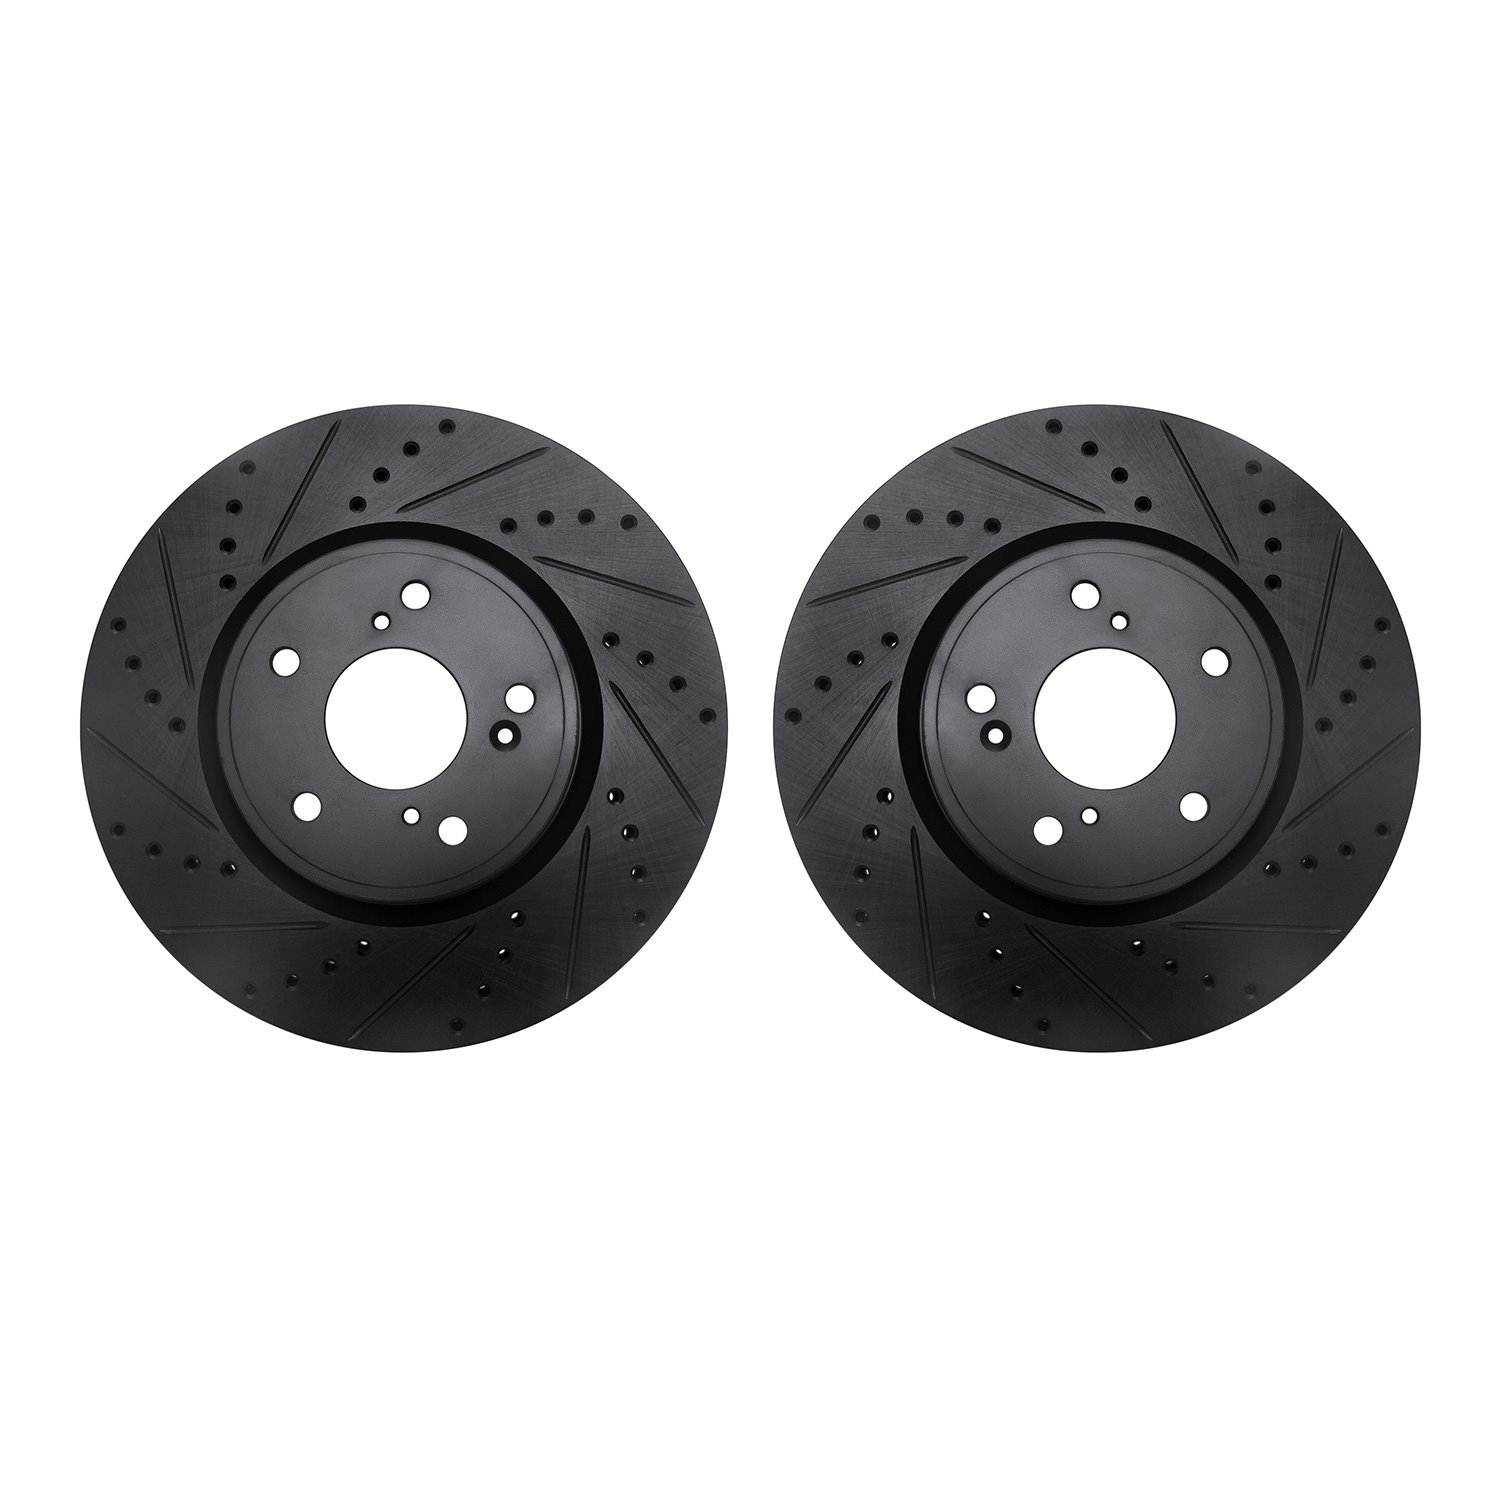 8002-58001 Drilled/Slotted Brake Rotors [Black], Fits Select Acura/Honda, Position: Front